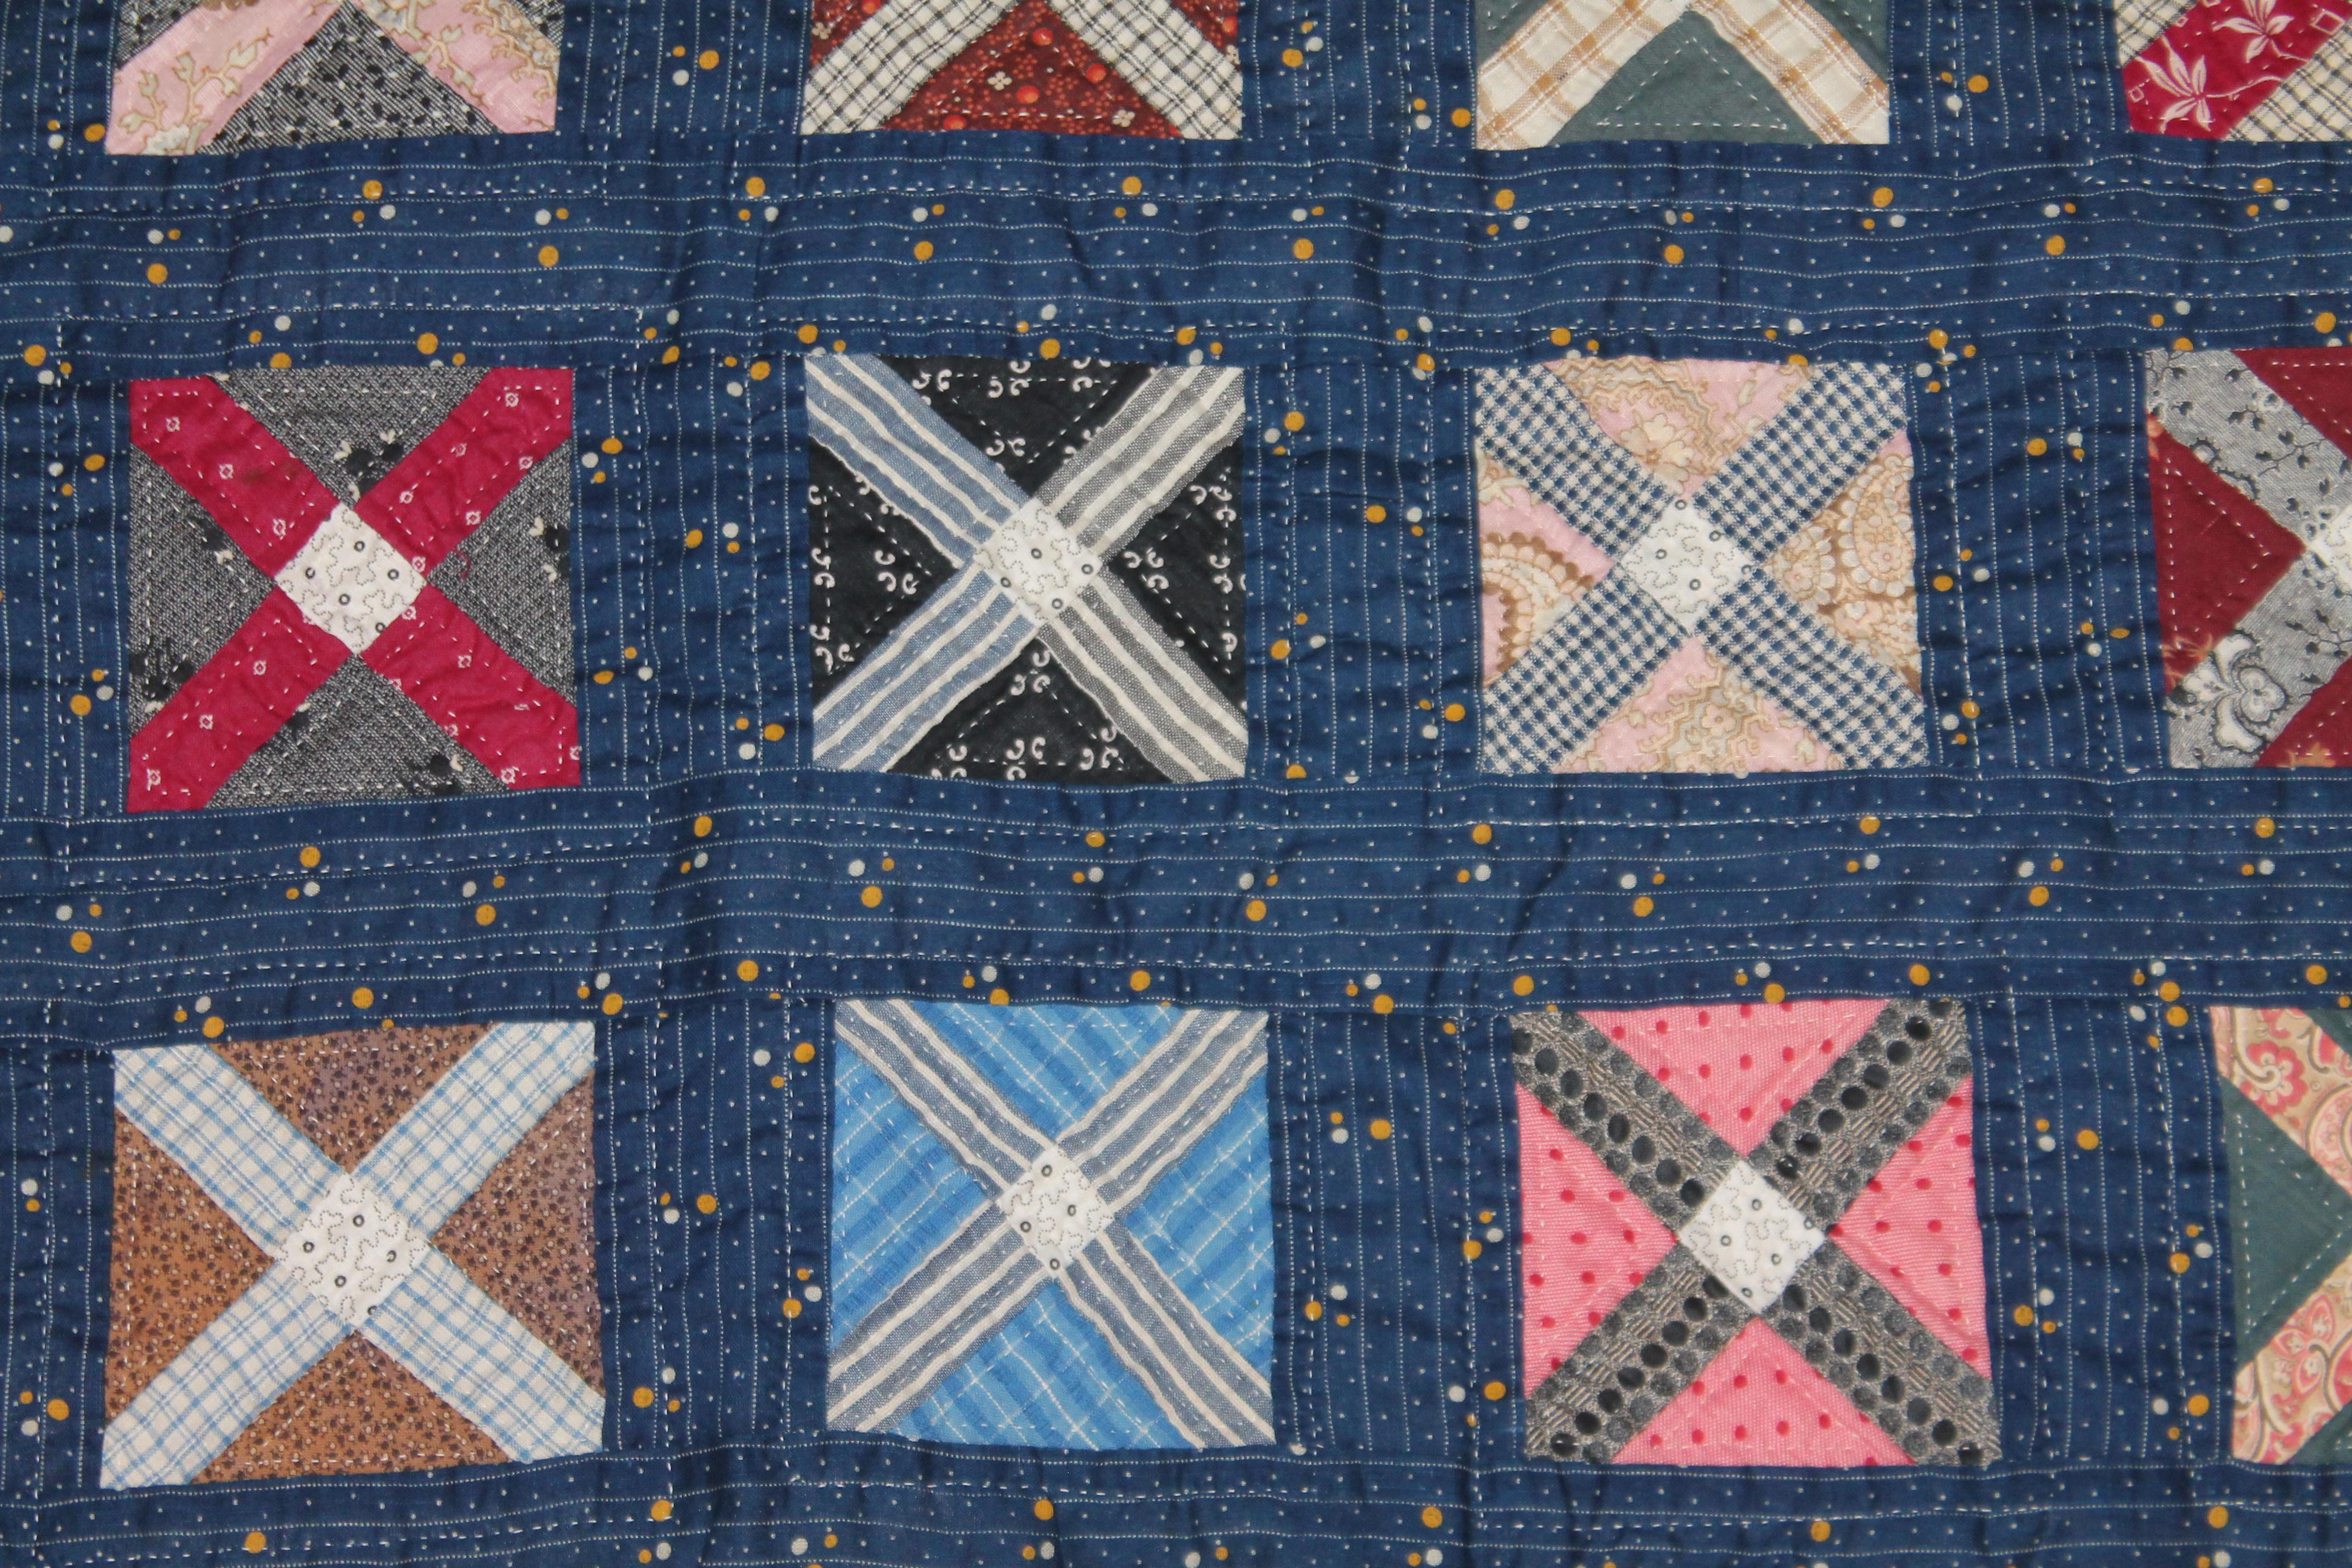 Hand-Crafted Antique Quilt, Blue Calico Four Patch Quilt From Ohio